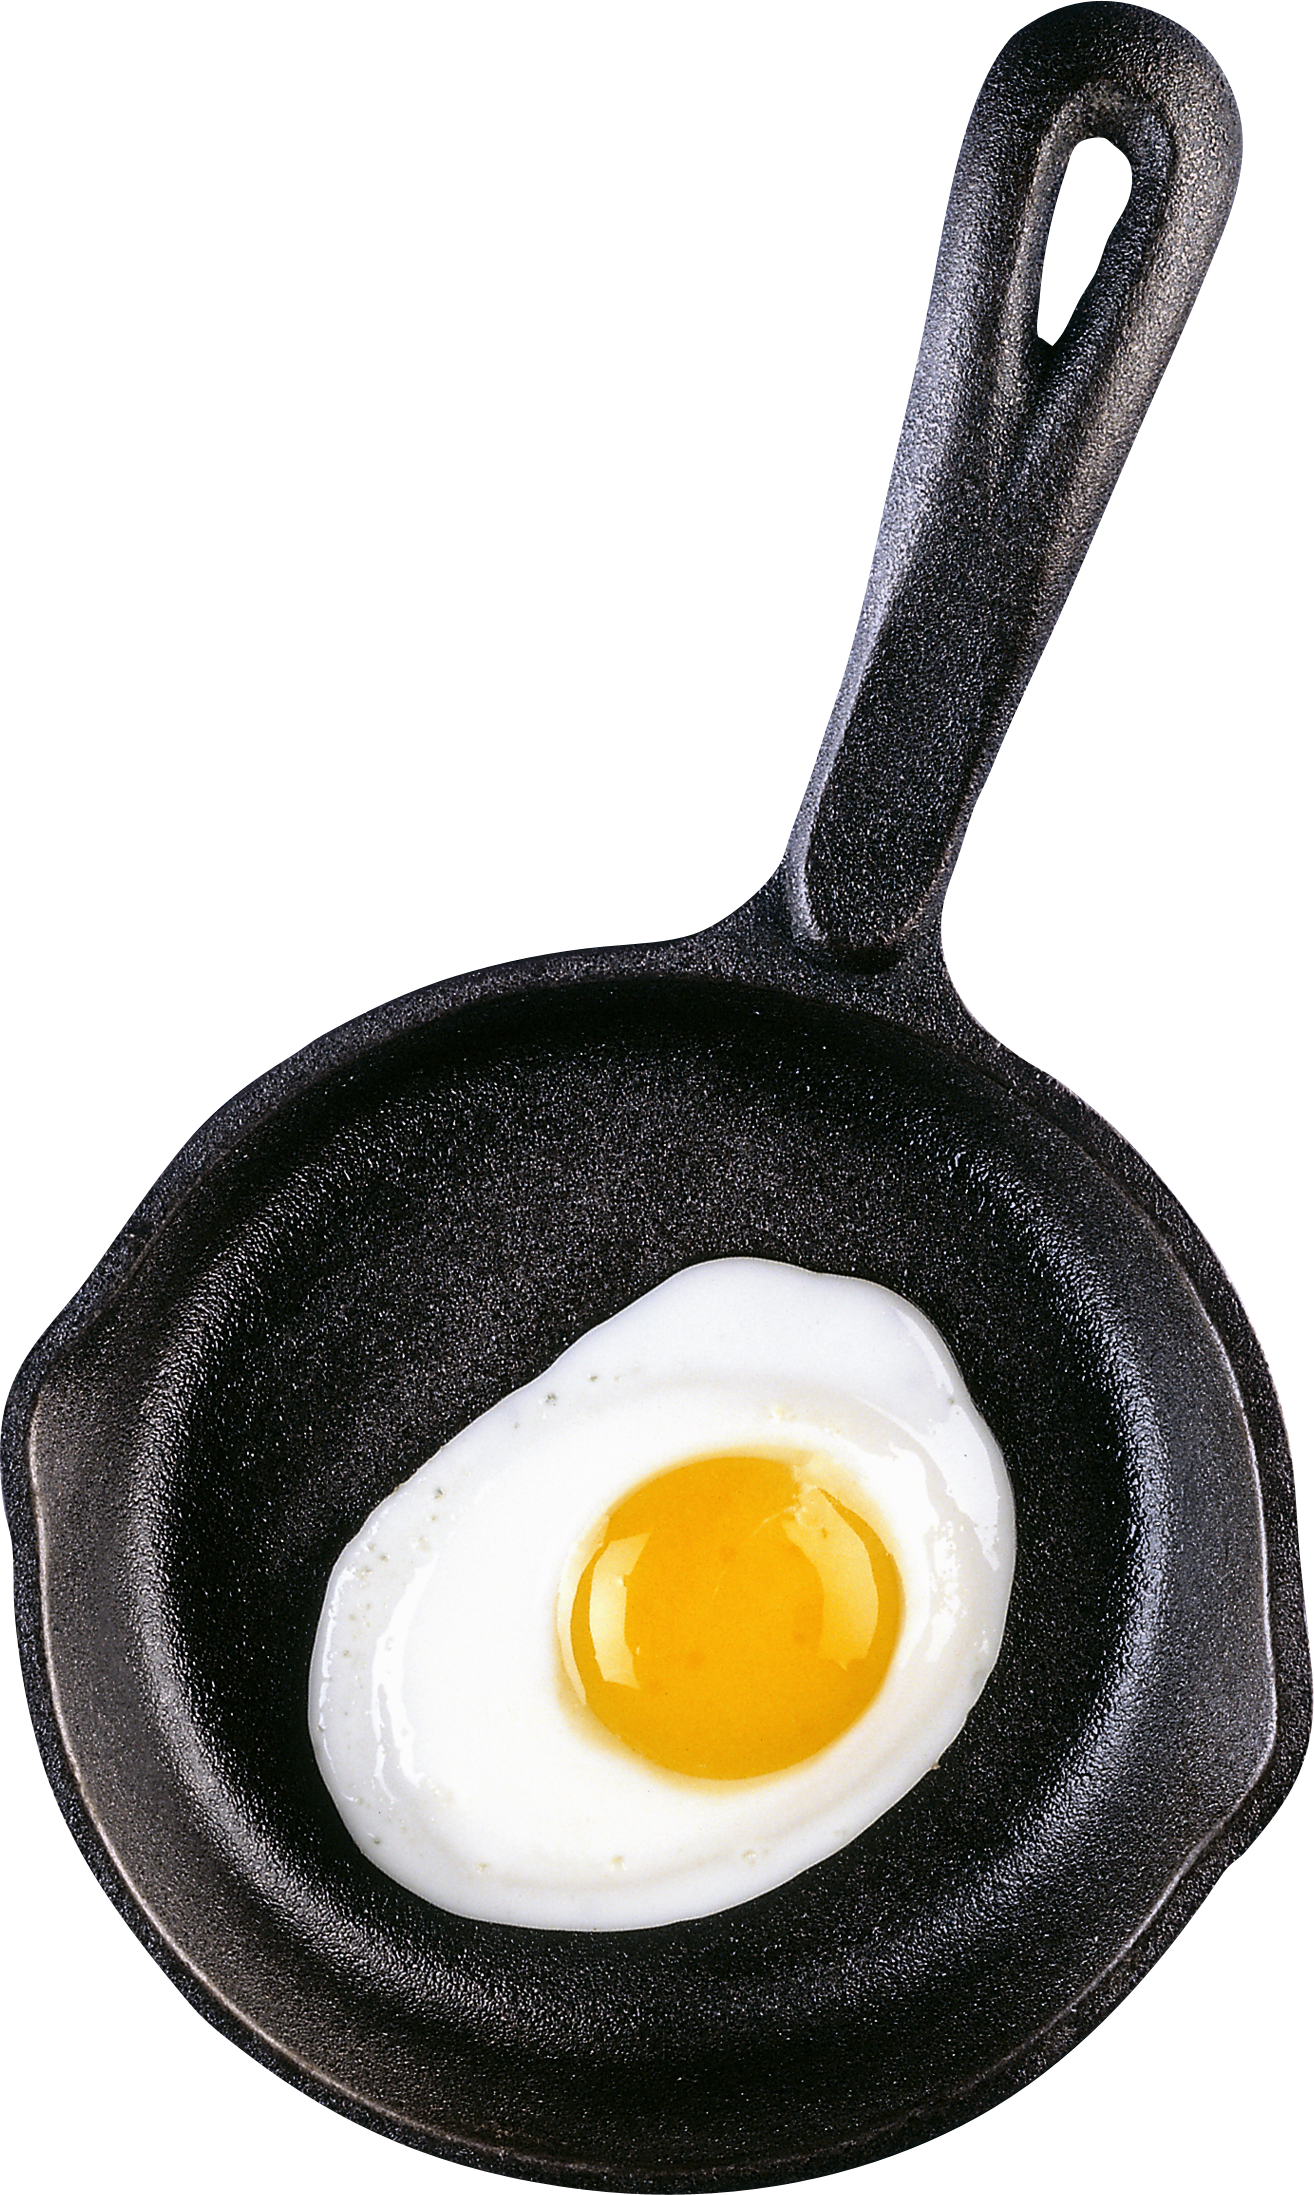 Frying Pan Png Image - Frying, Transparent background PNG HD thumbnail